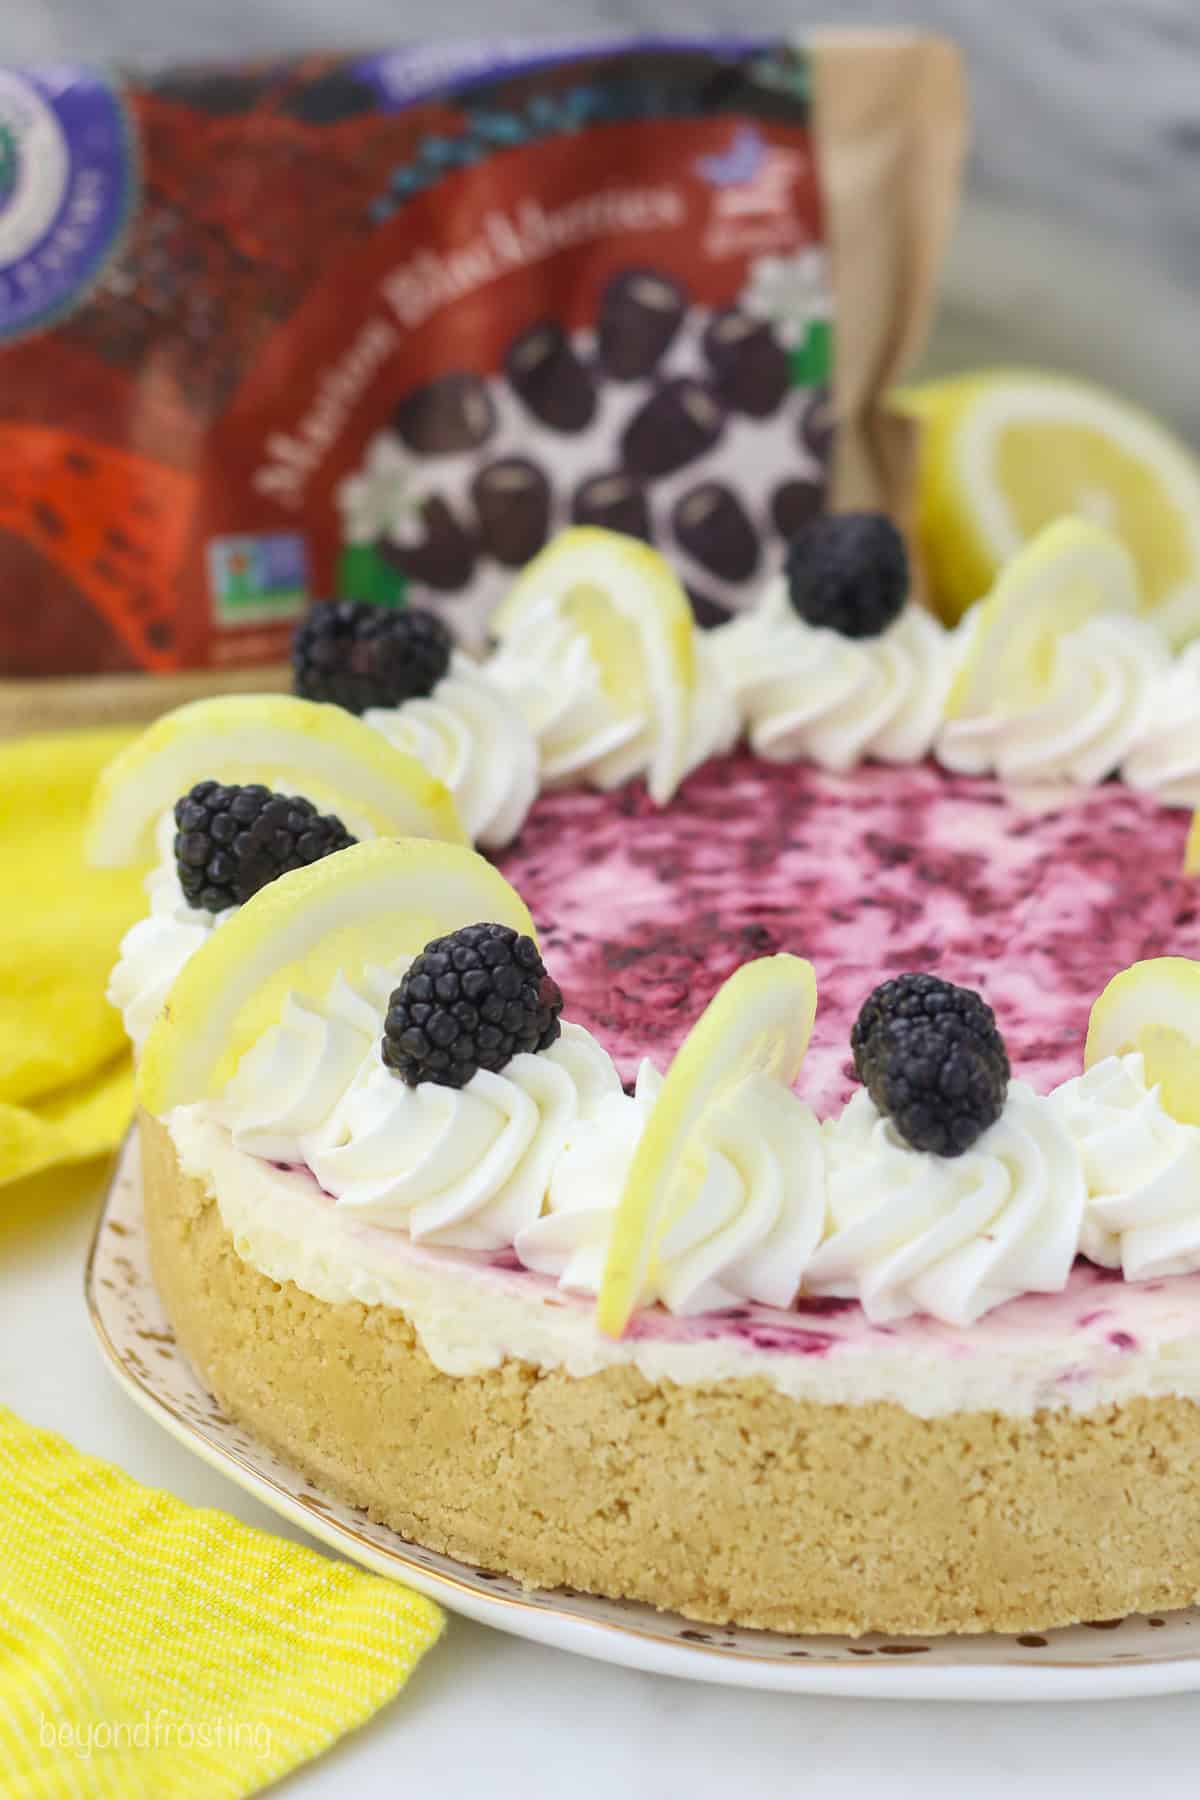 A no-bake blackberry lemon cheesecake decorated with swirls of whipped cream and garnished with lemon wedges and fresh blackberries.